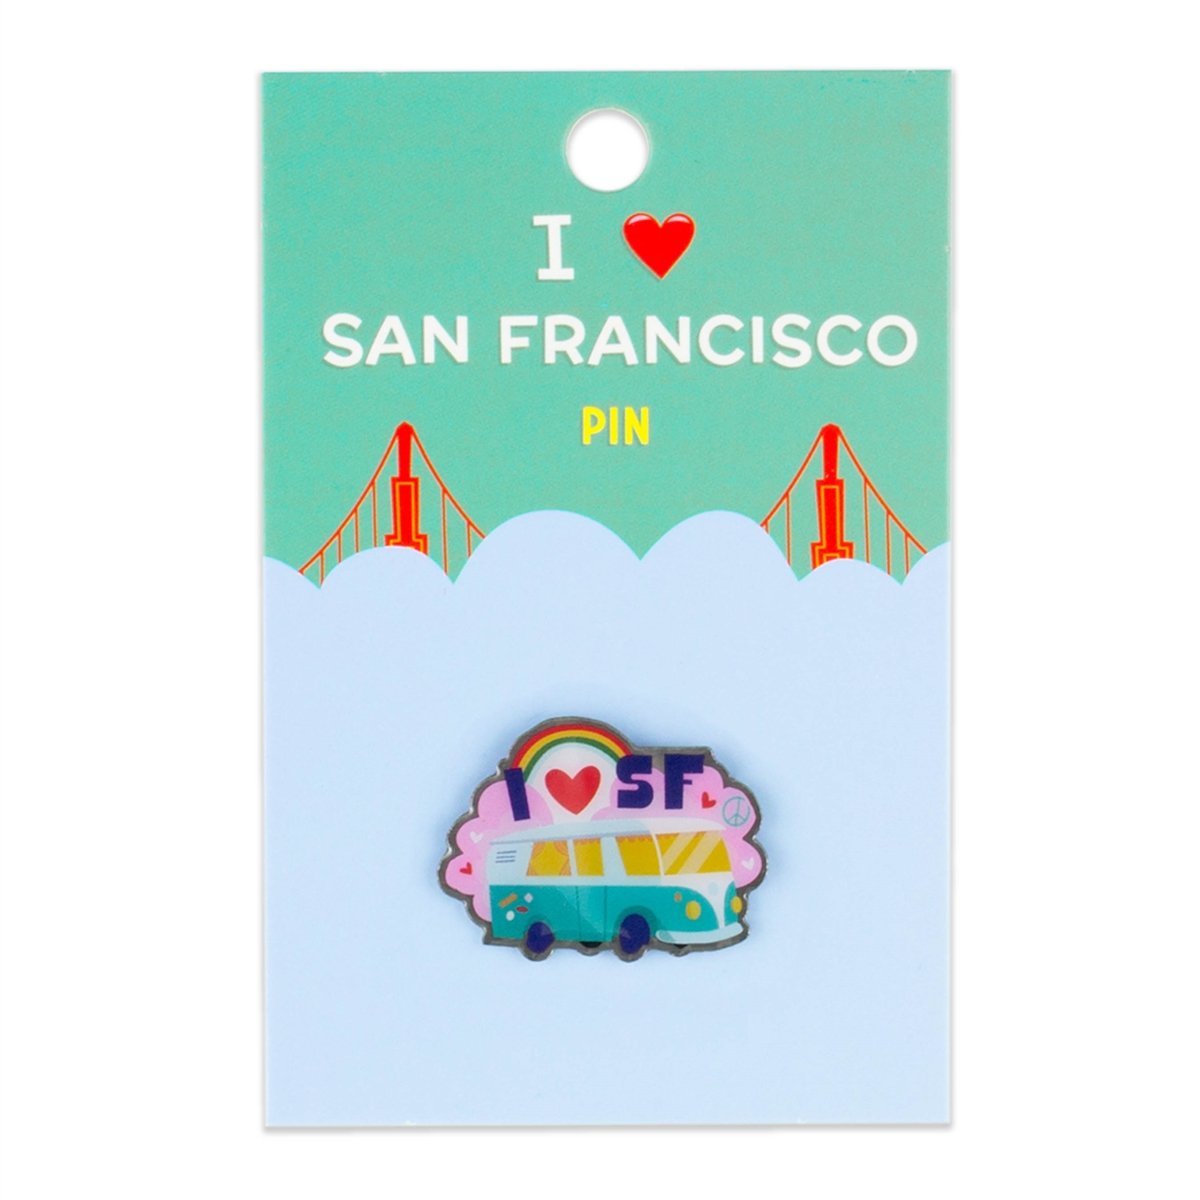 I Heart San Francisco "Groovy" pin, featuring colorful vintage-inspired illustration of VW van and rainbow.